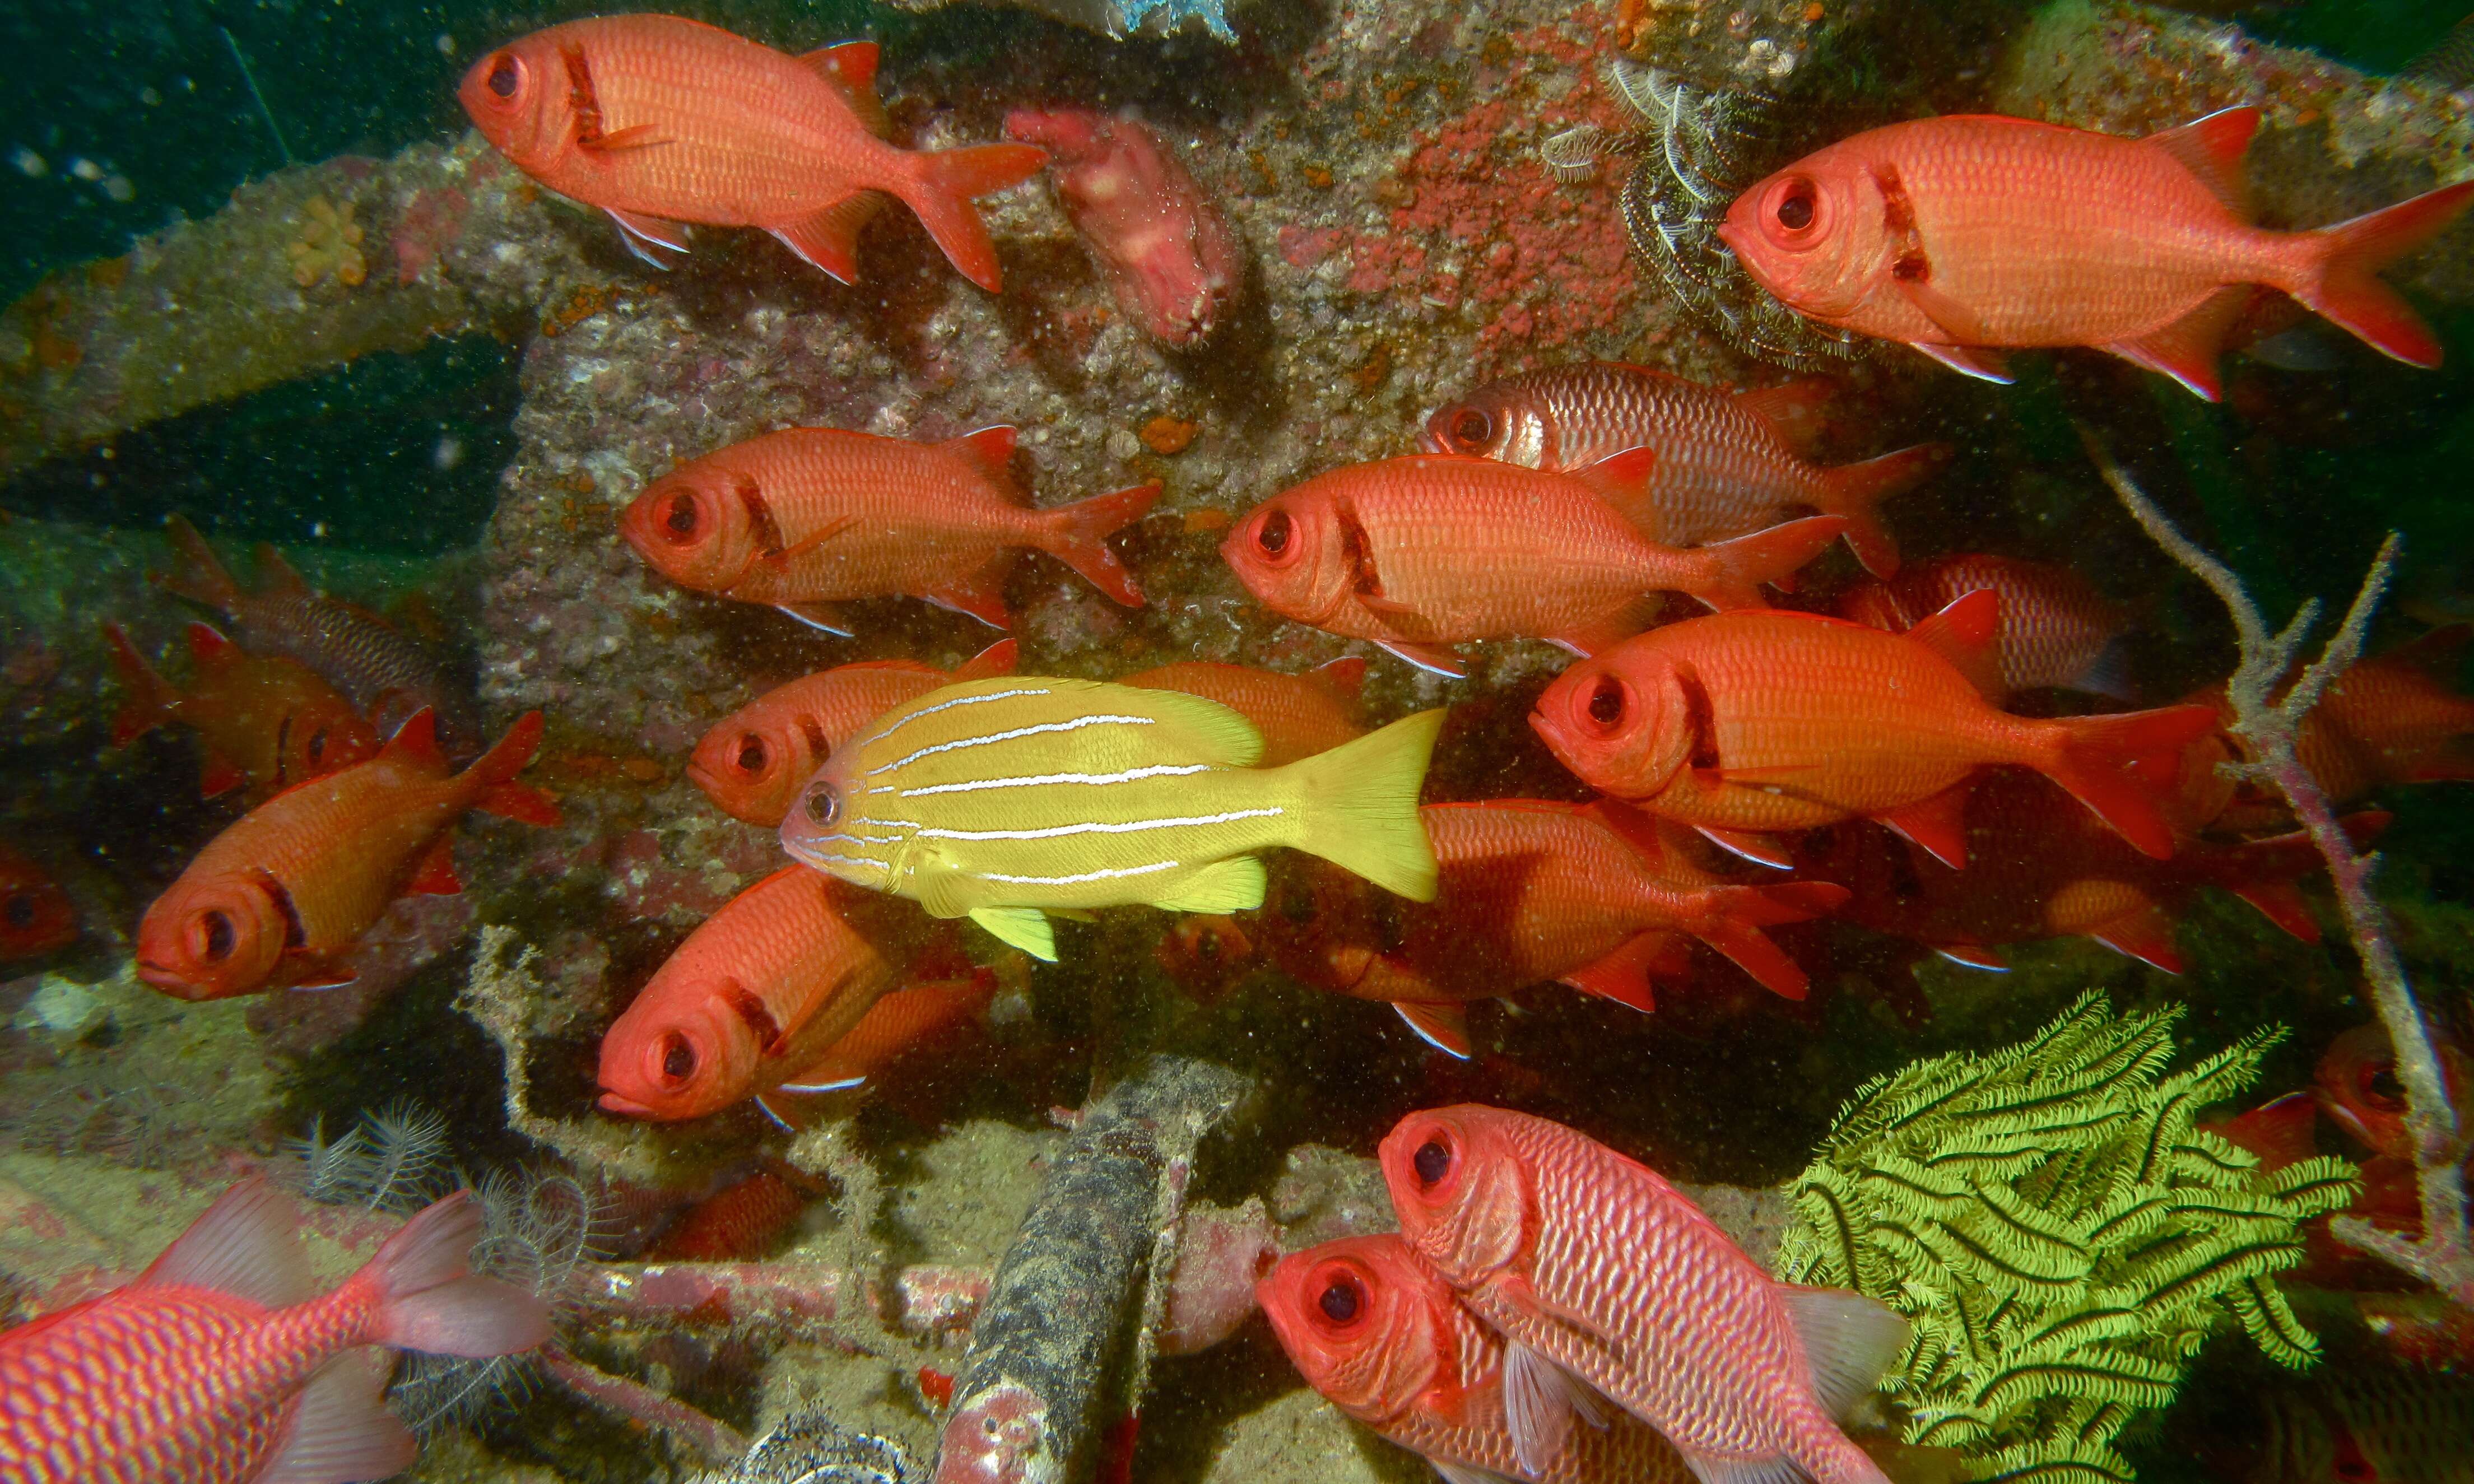 Image of Five-lined snapper